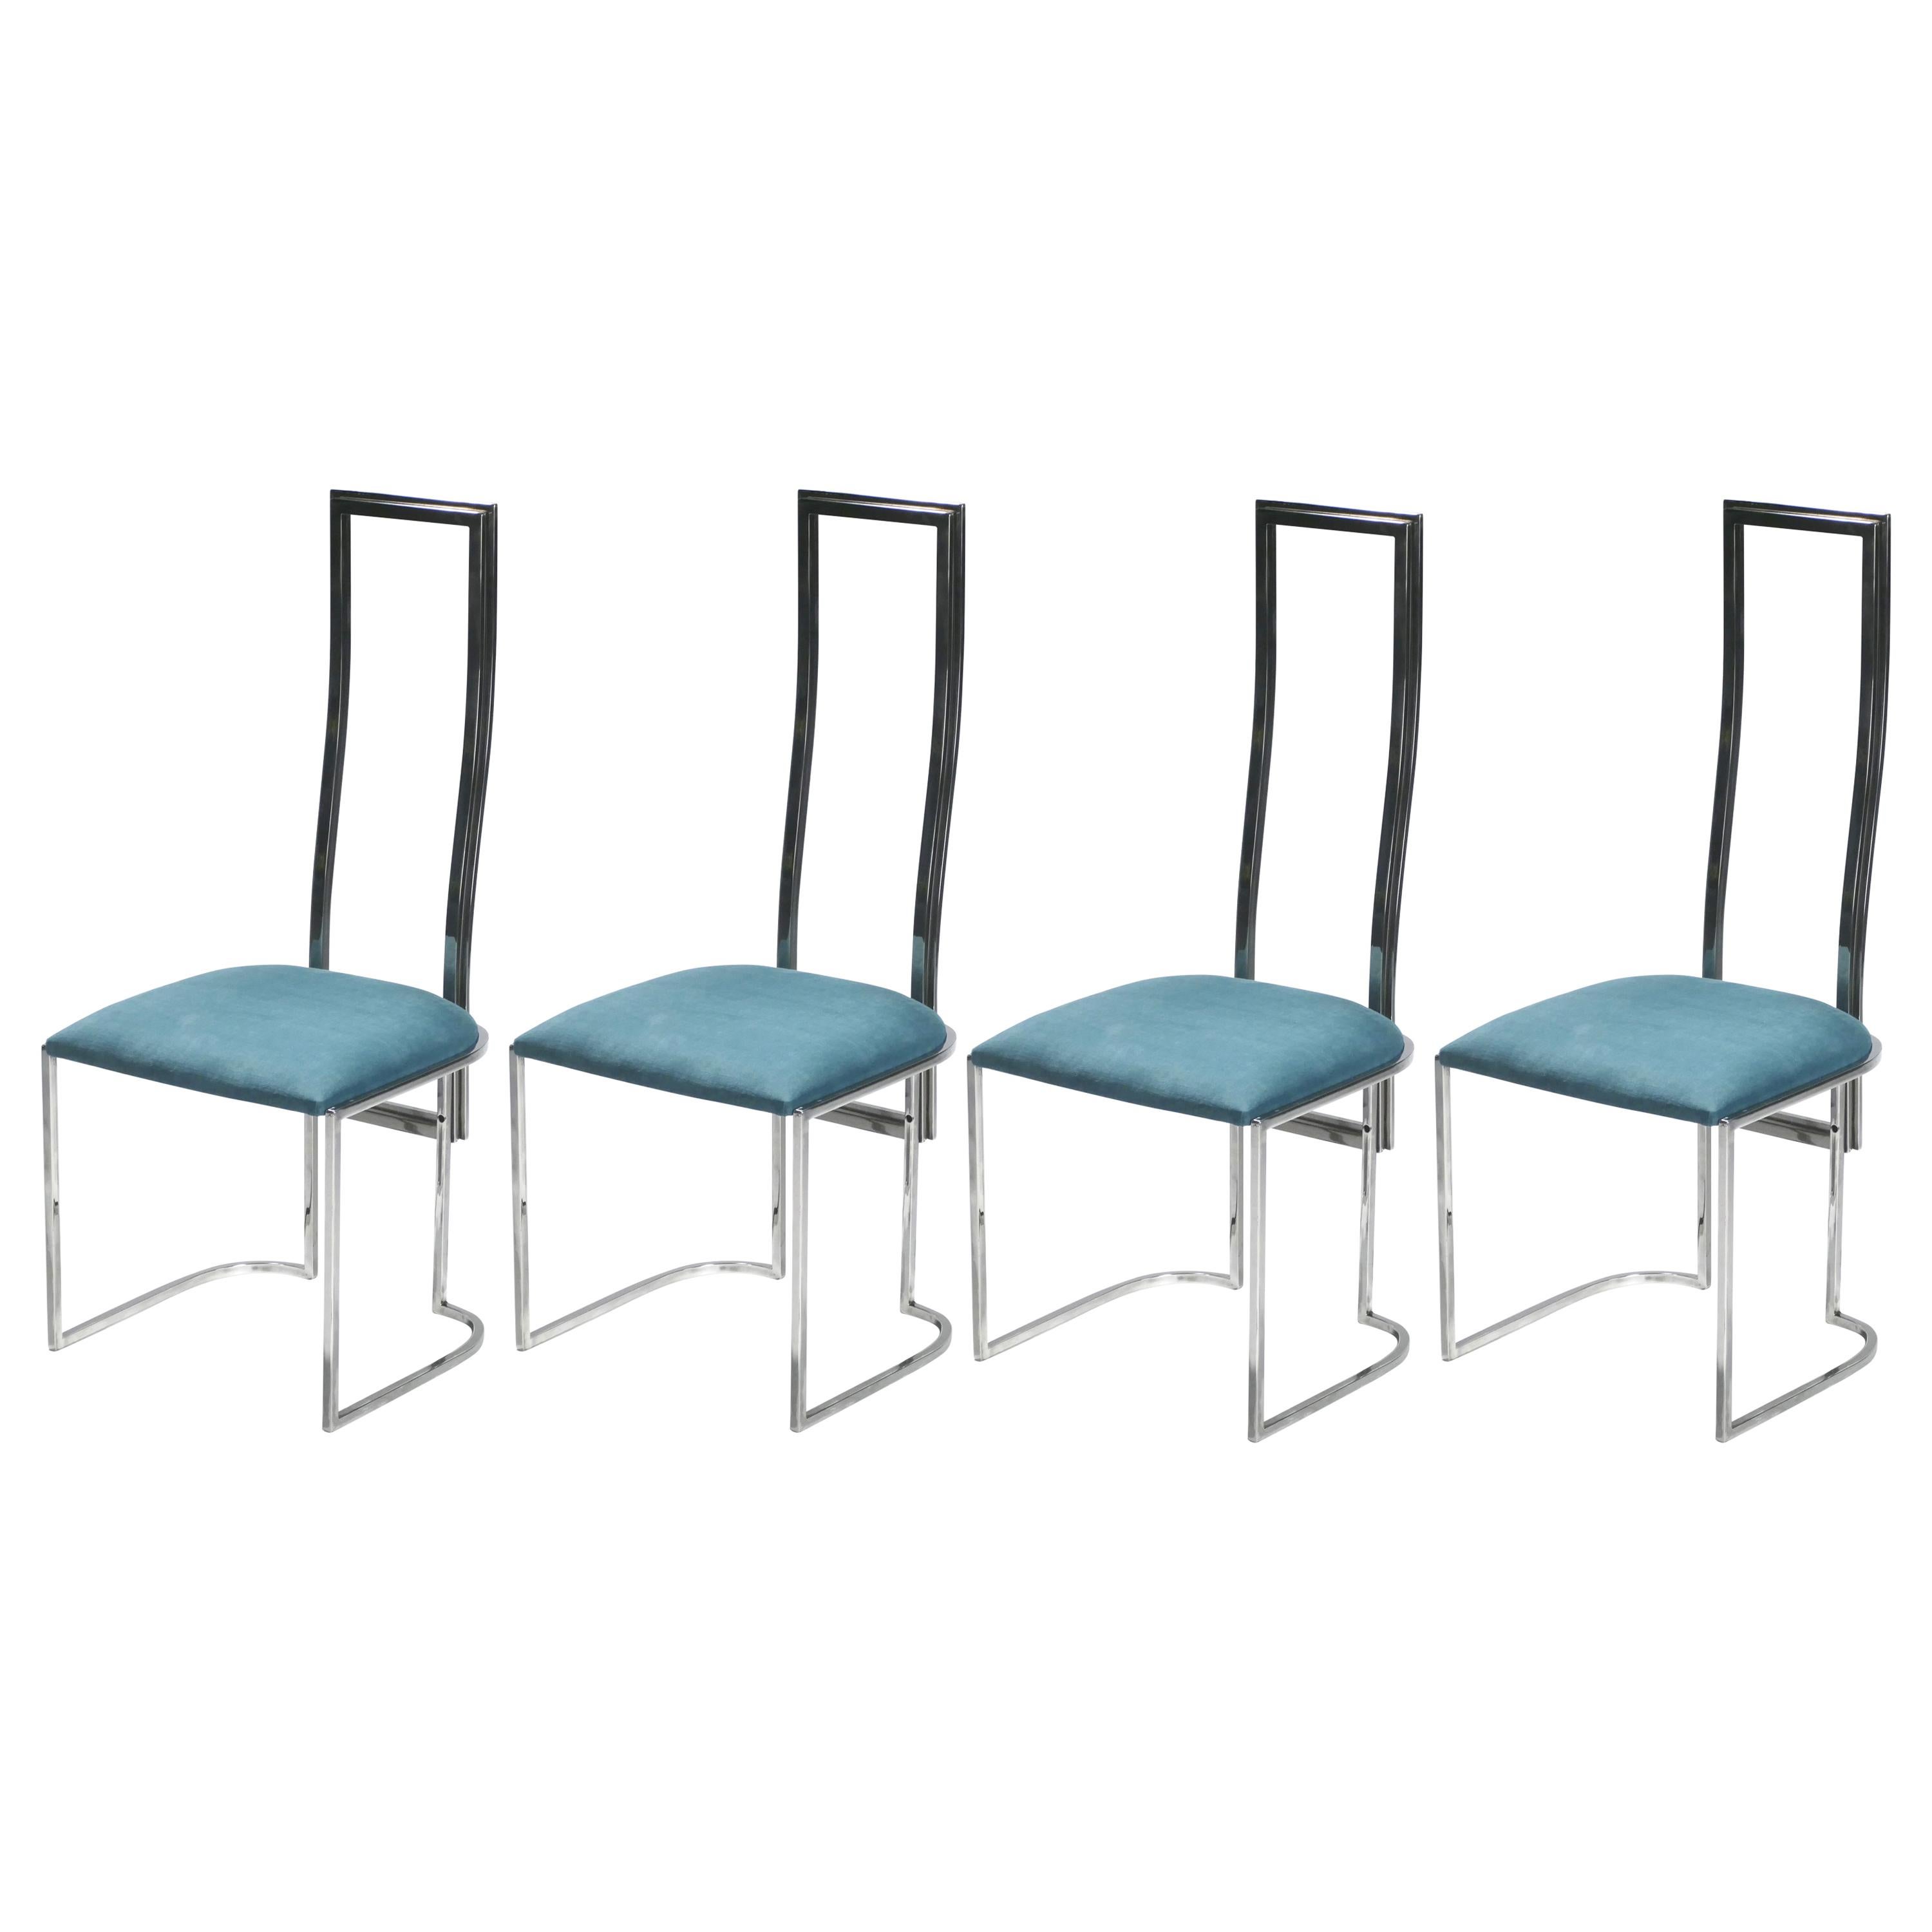 Set of 4 Midcentury Italian Lucite Green Chairs, 1970s